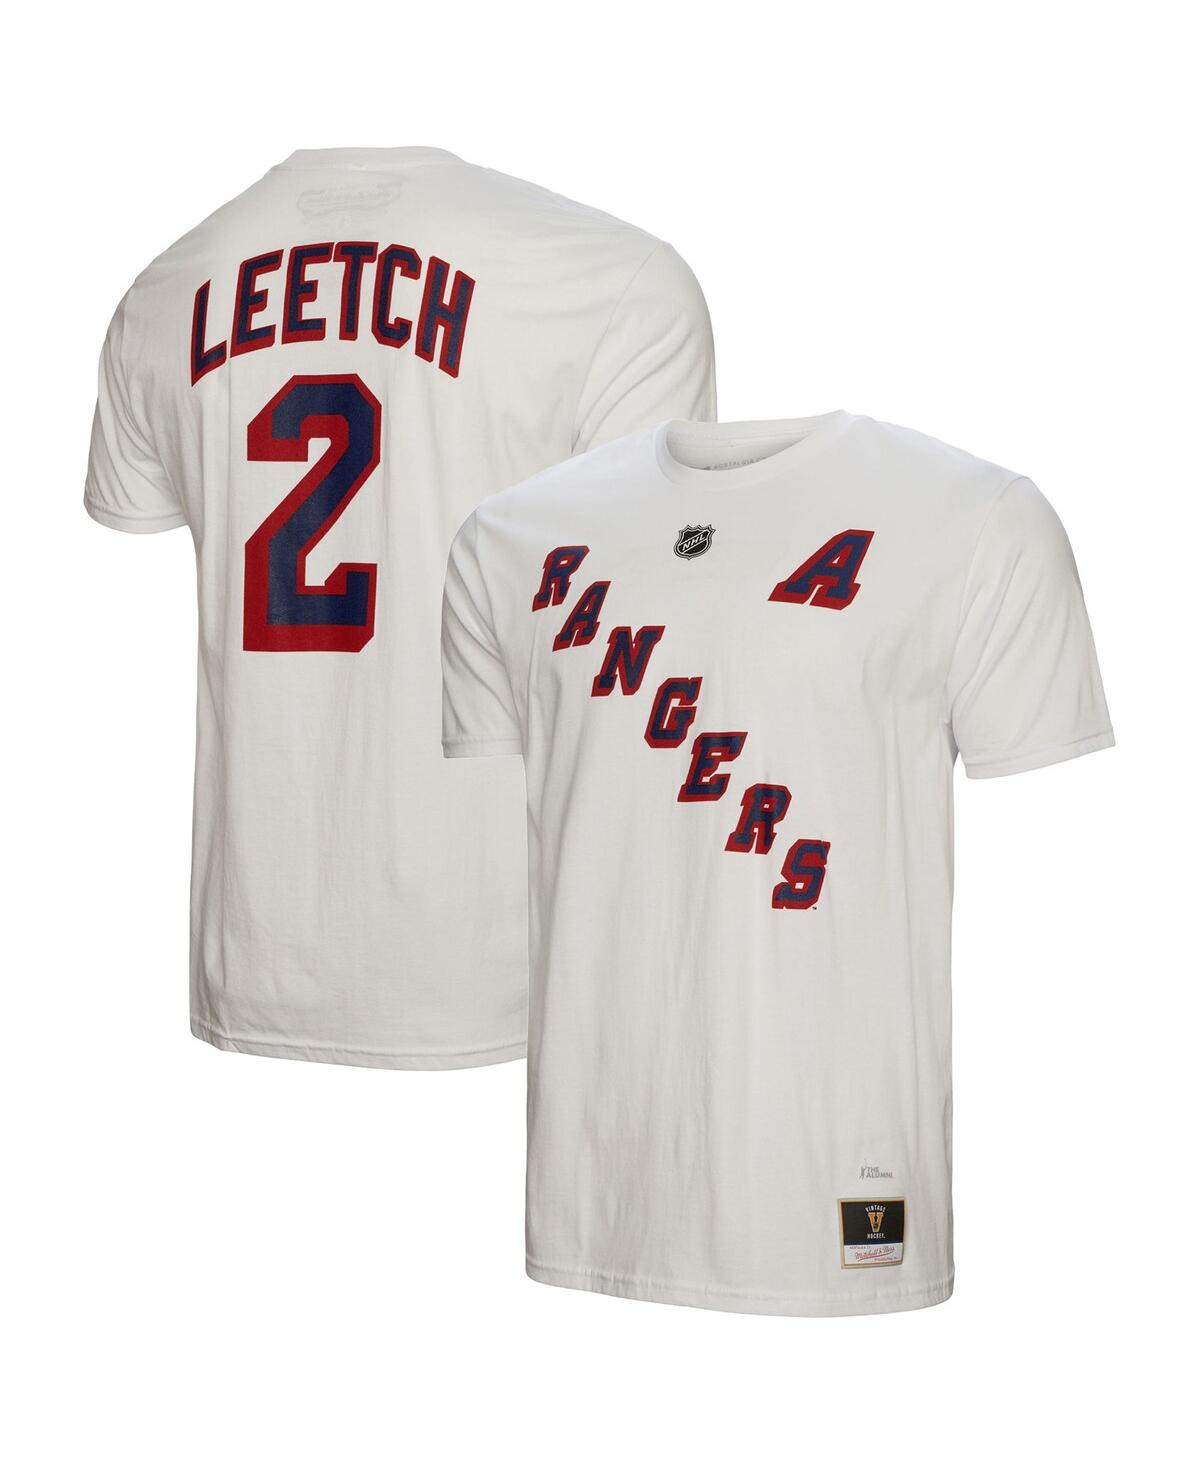 Men's Mitchell & Ness Brian Leetch White New York Rangers Name and Number T-shirt - White